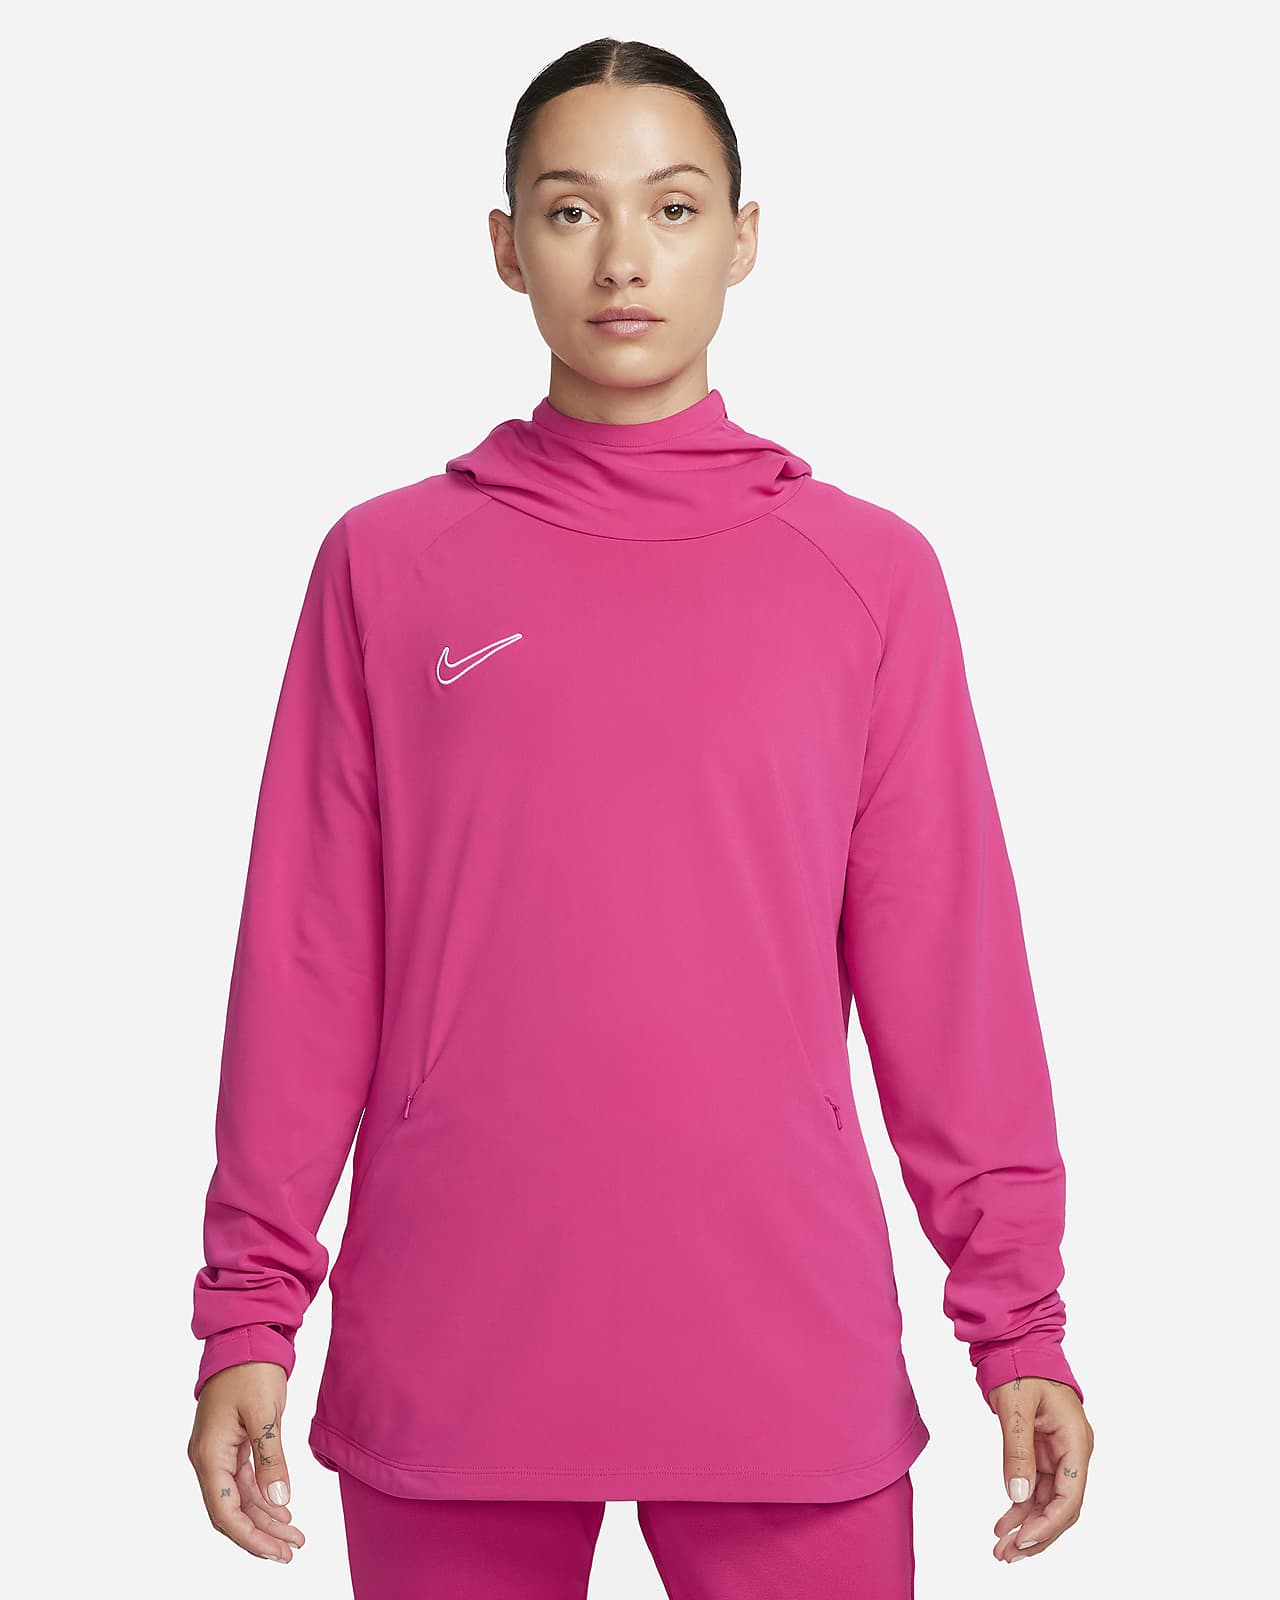 https://static.nike.com/a/images/t_PDP_1280_v1/f_auto,q_auto:eco/7b1934cf-008a-4738-8843-2a26bd17aee1/dri-fit-academy-hoodie-K9FN29.png